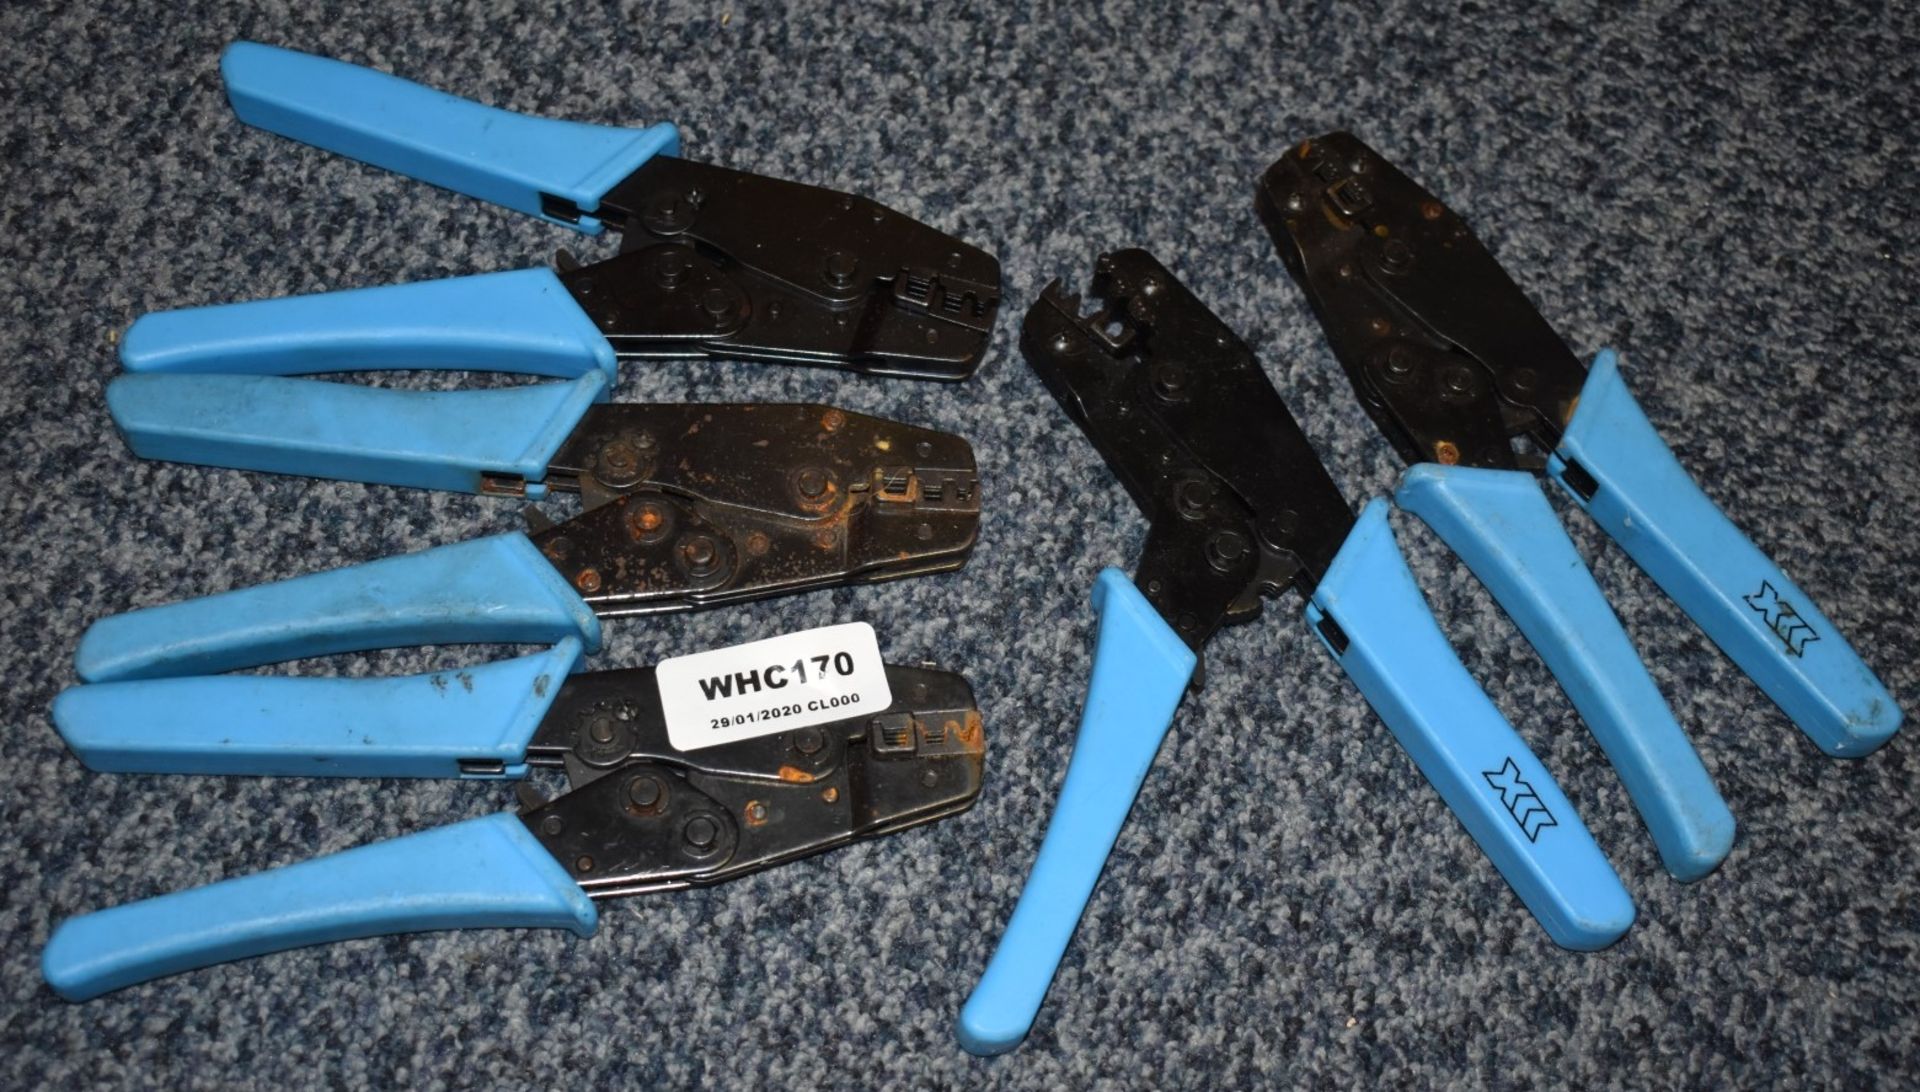 5 x XXX Manual Cable Crimping Tools - Ref WHC170 WH2 - CL011 - Location: Altrincham WA14